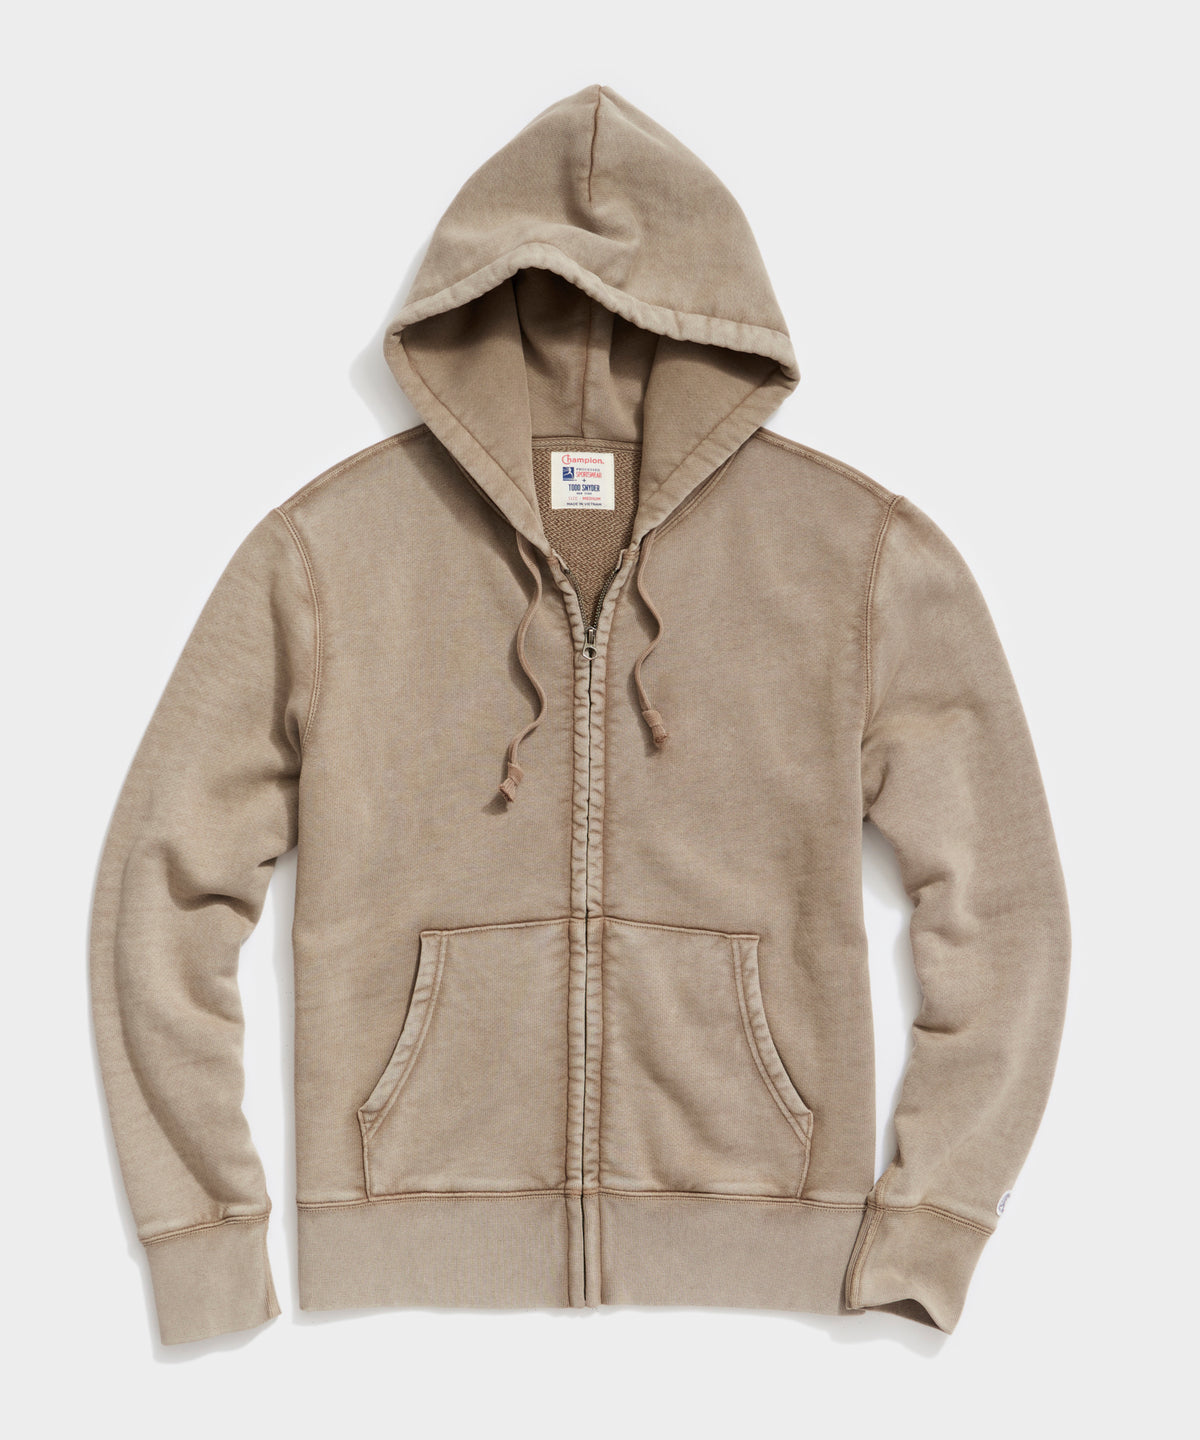 Midweight Full Zip Hoodie in Toasted Almond